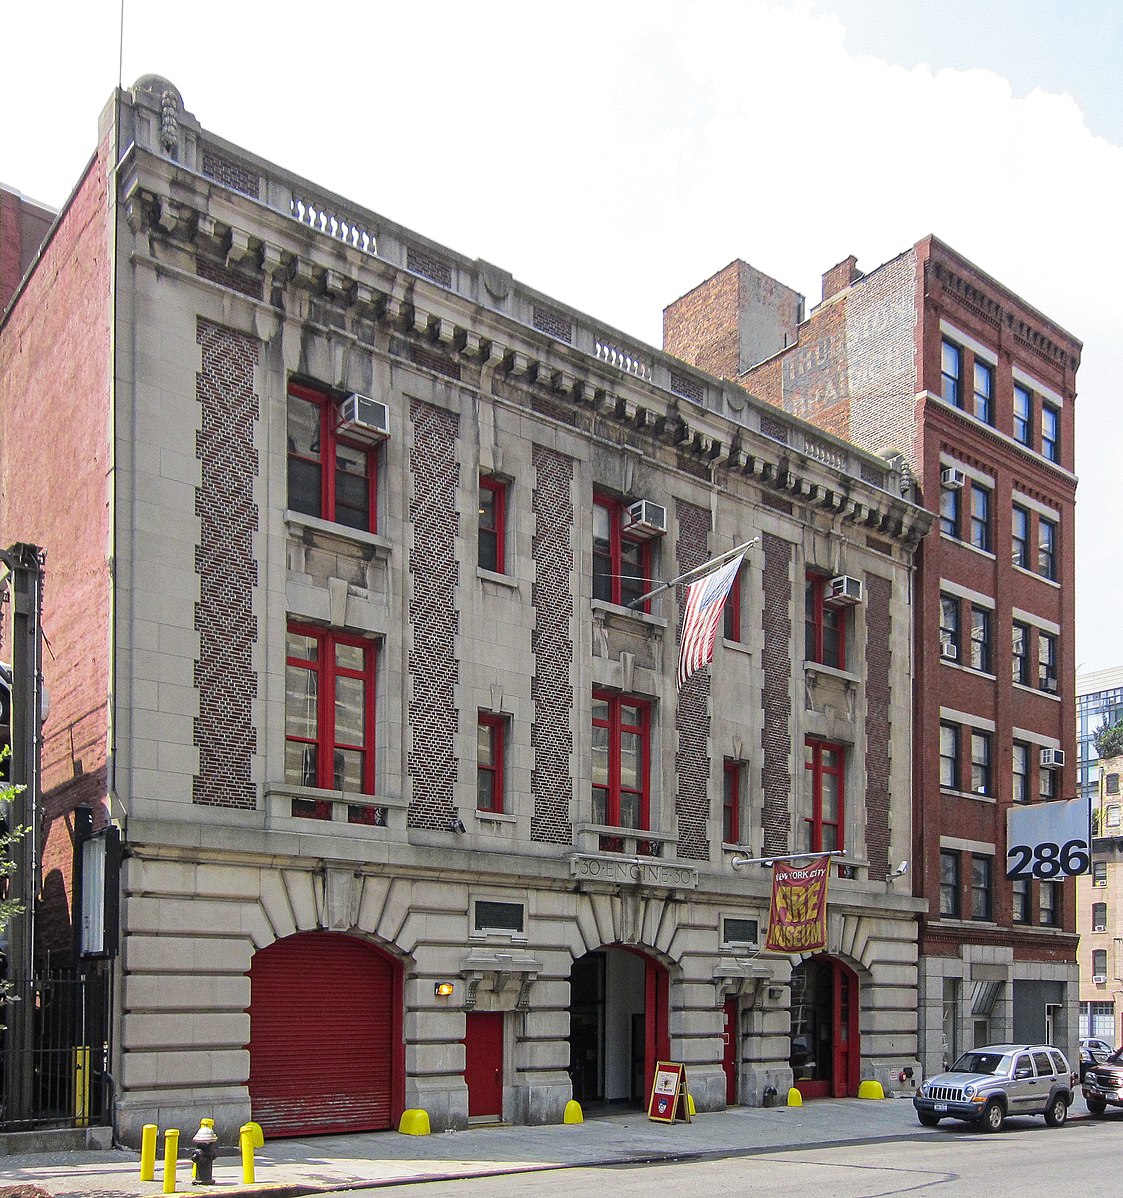 the New York City Fire Museum